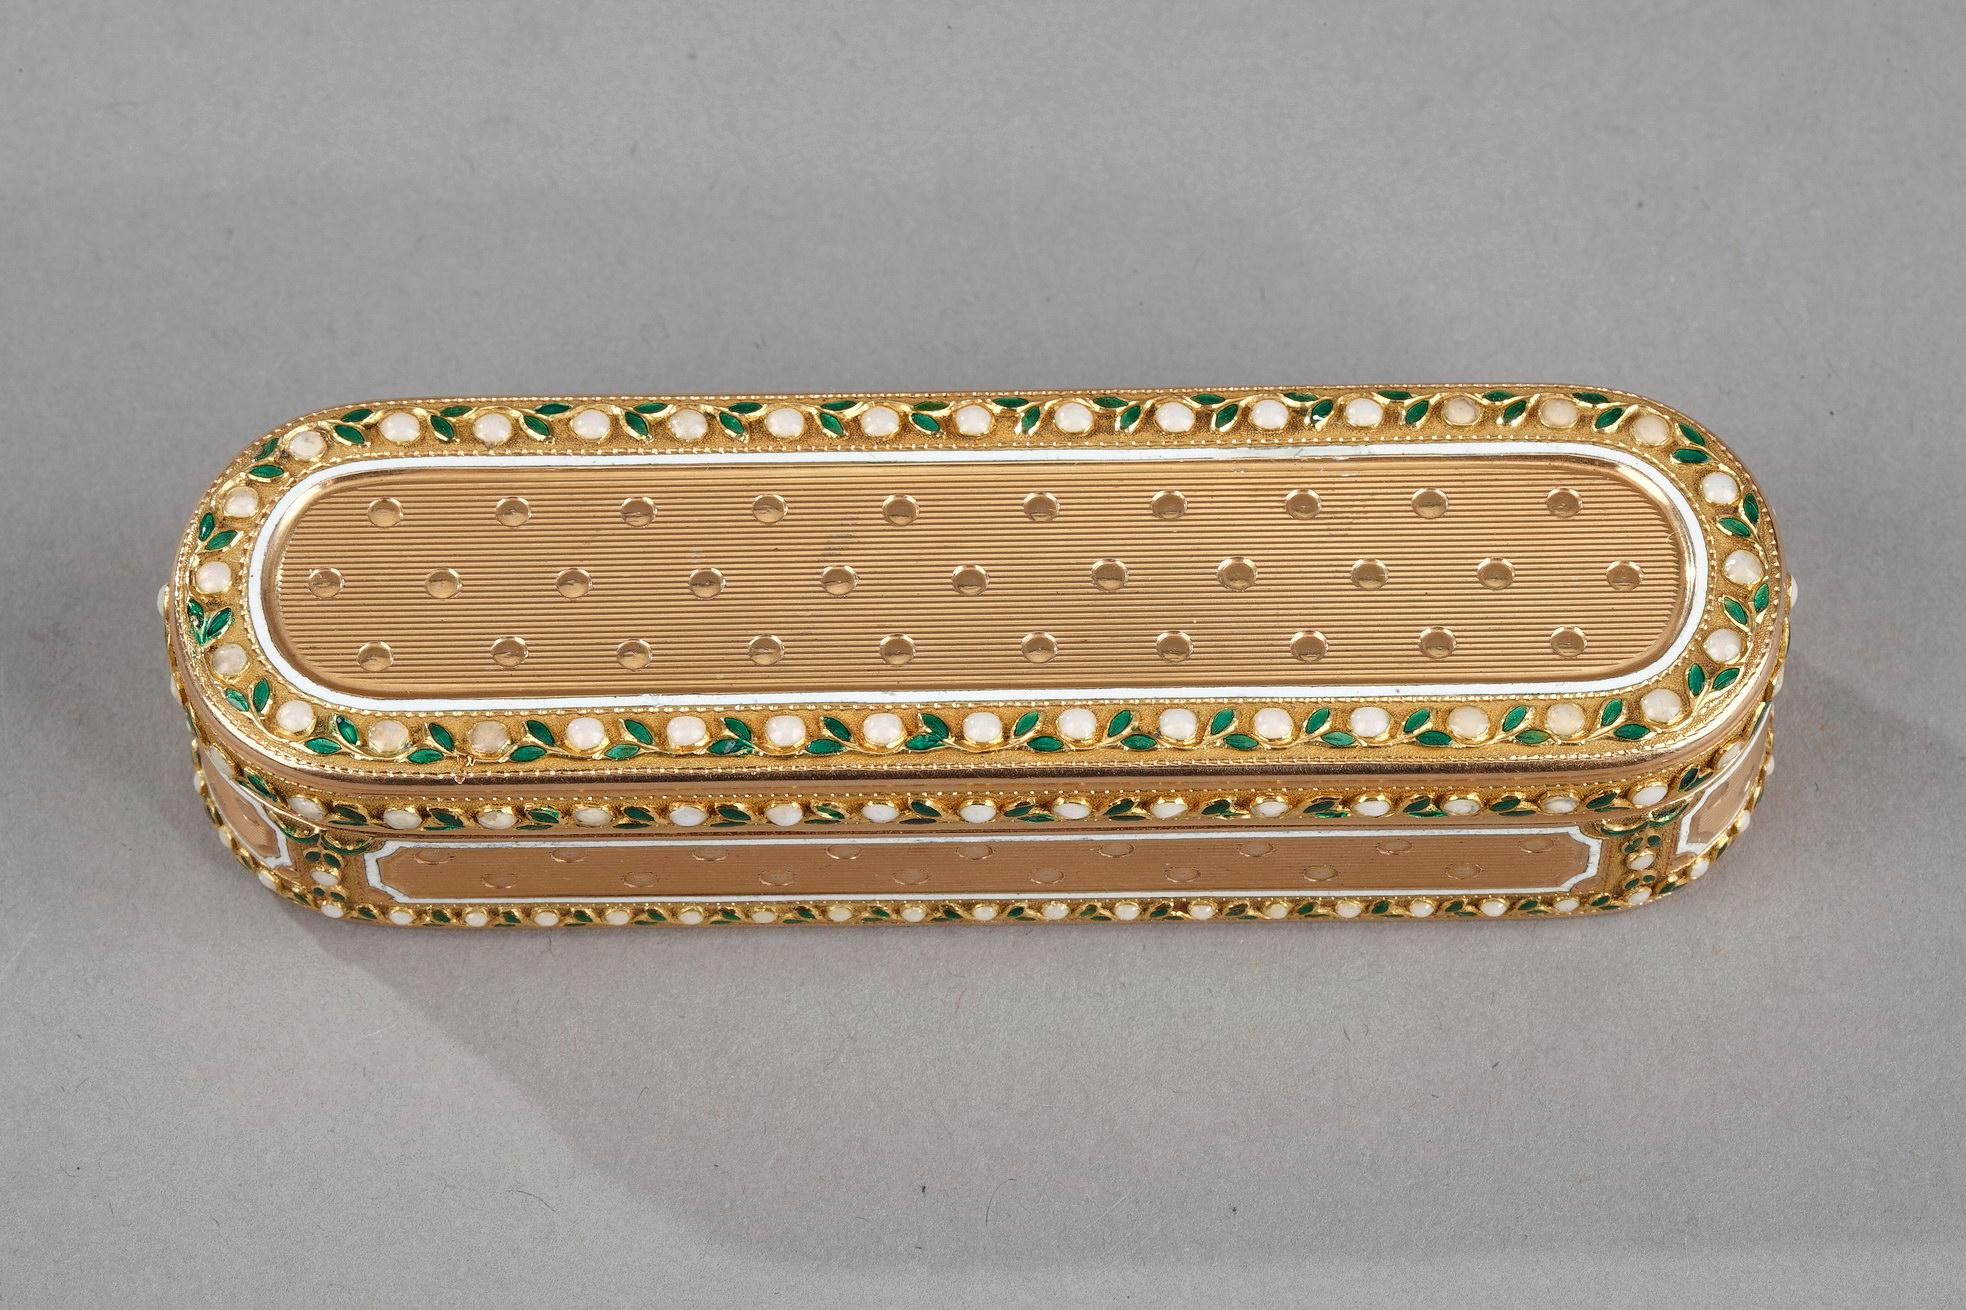 An gold and oblong shape features rounded ends snuff-box. The hinged lid, the base and the four panels of the side are decorated with a guilloche pattern with parallel stripes and dots. The border is decorated with a scrolling leaf-and-bead enhanced